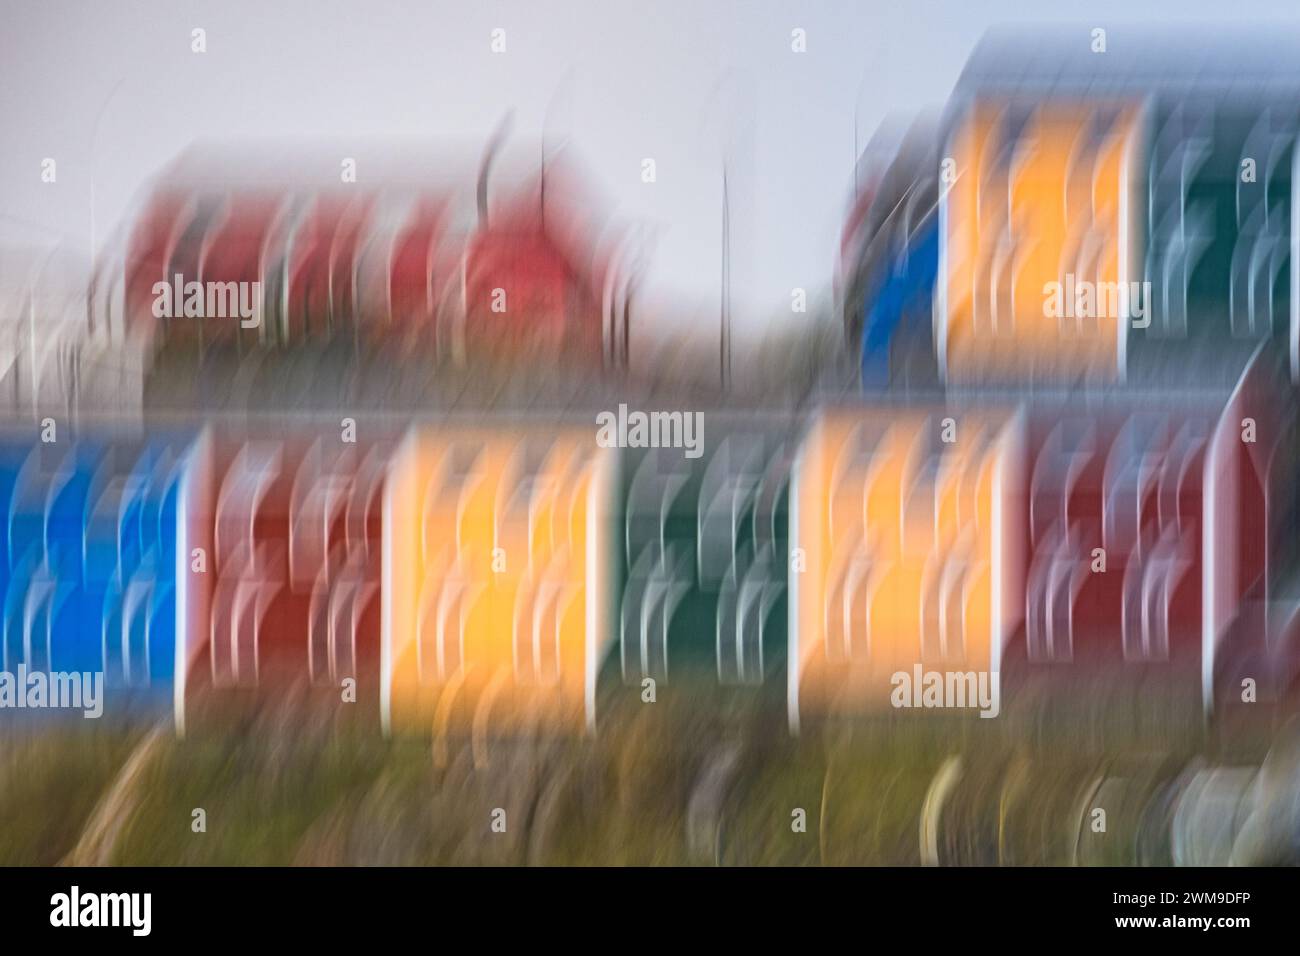 Intentional Camera Movement (ICM) creates unique patterns of houses in Sisimiut that are painted in bright reds, yellows, blues and greens. Stock Photo